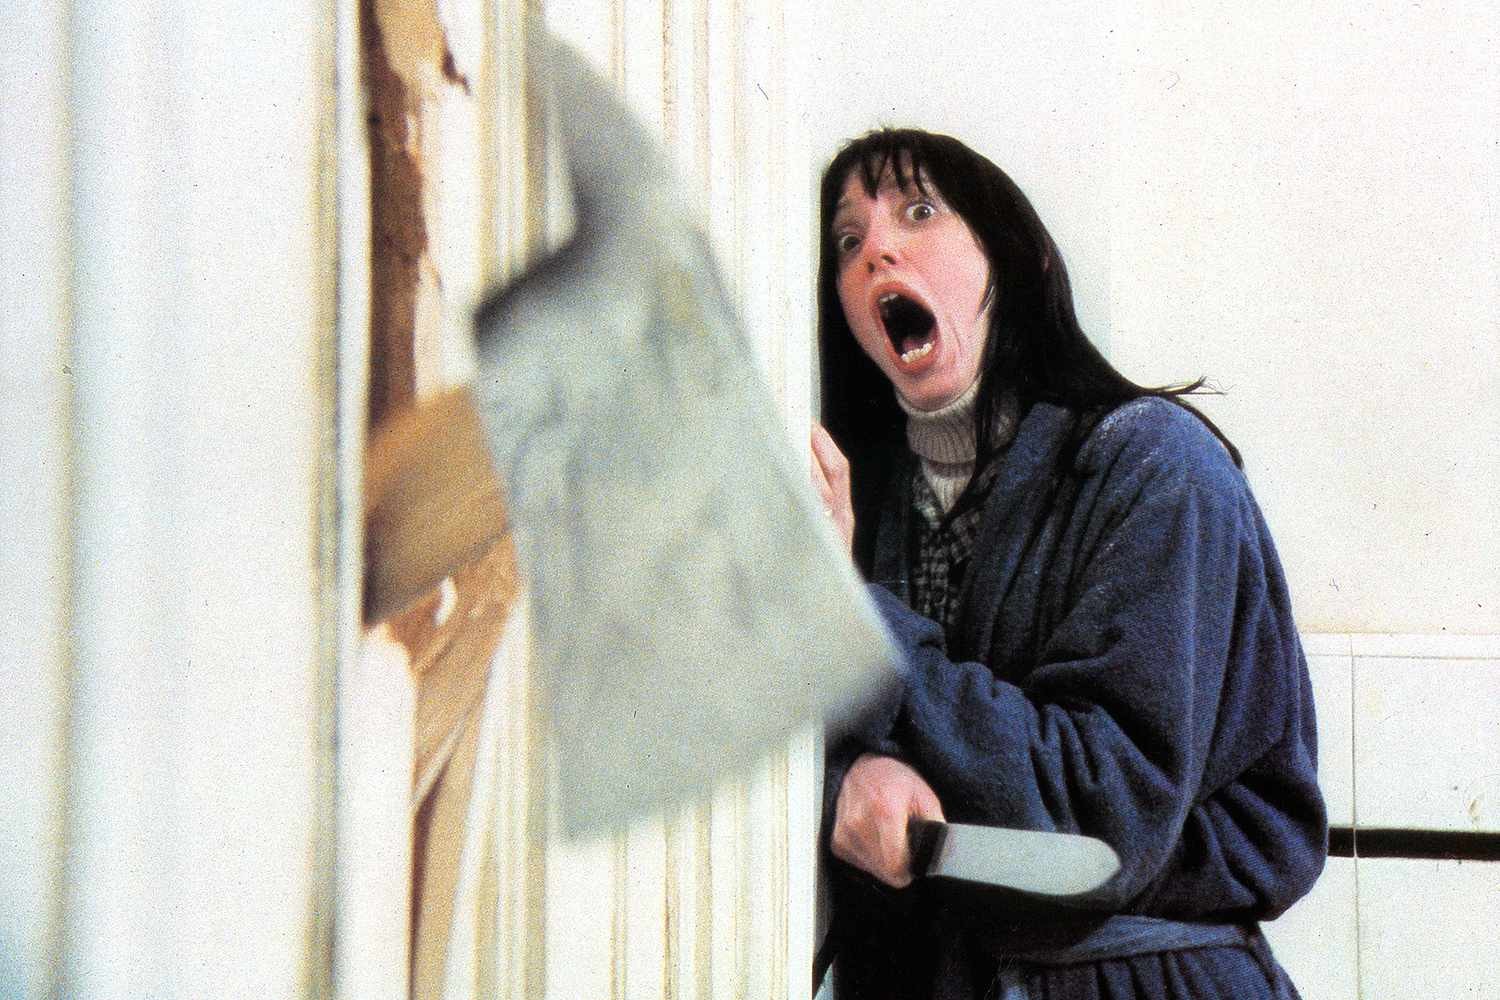 Shelley Duvall had to cry everyday on the set of The Shining Stephen King's The Shining